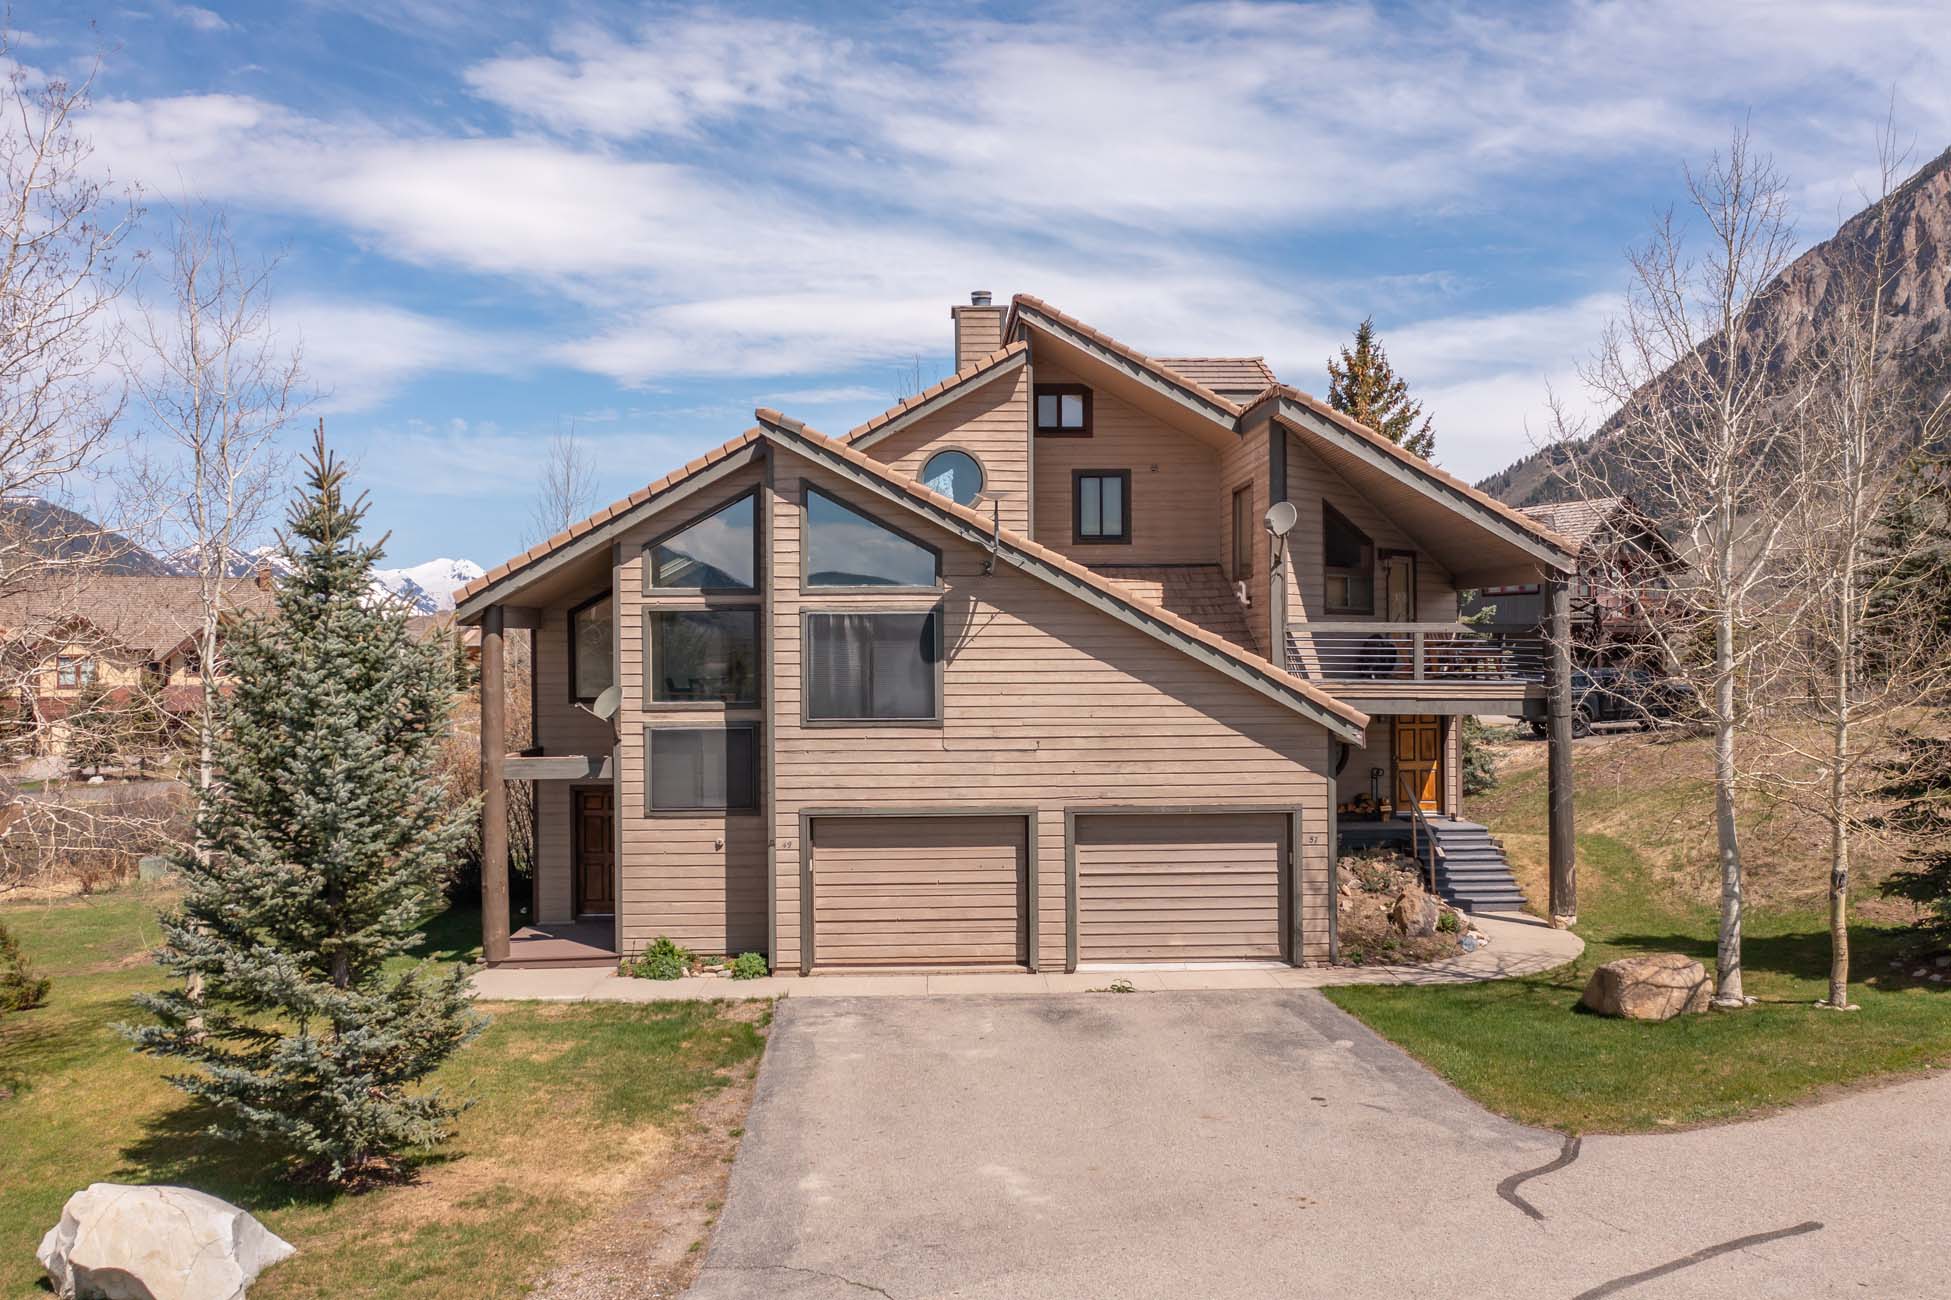 49 Powderview Drive, Crested Butte Colorado - front of house